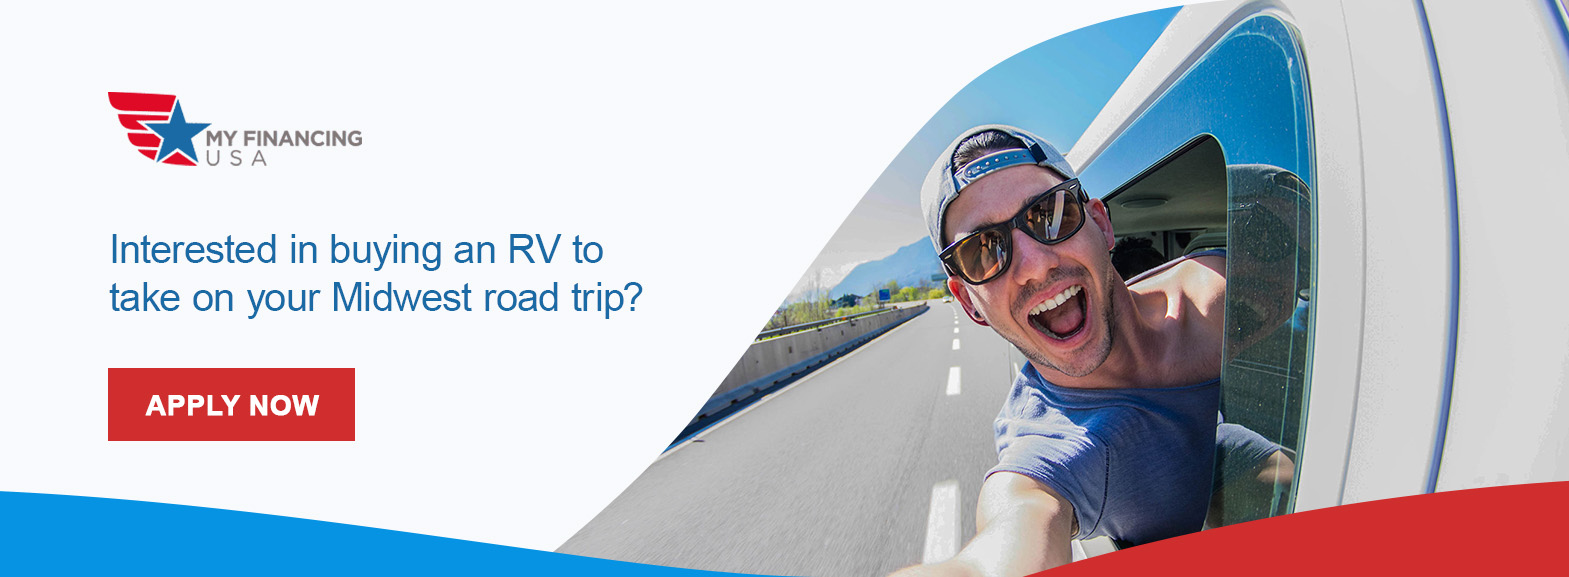 Interested in buying an RV to take on your Midwest road trip? Apply now!